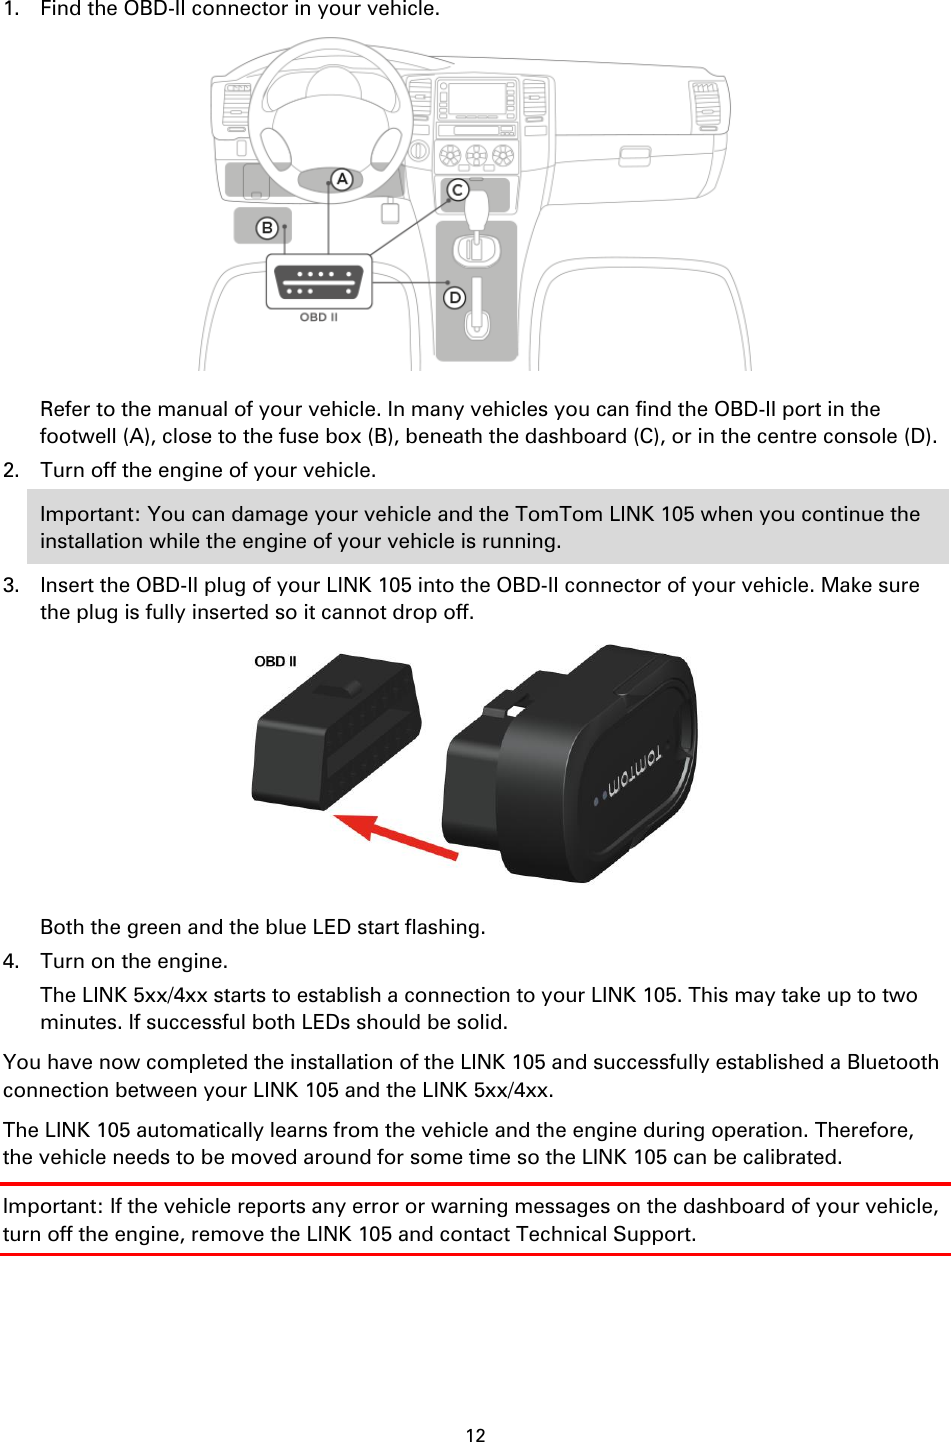 12    1. Find the OBD-II connector in your vehicle.  Refer to the manual of your vehicle. In many vehicles you can find the OBD-II port in the footwell (A), close to the fuse box (B), beneath the dashboard (C), or in the centre console (D). 2. Turn off the engine of your vehicle. Important: You can damage your vehicle and the TomTom LINK 105 when you continue the installation while the engine of your vehicle is running. 3. Insert the OBD-II plug of your LINK 105 into the OBD-II connector of your vehicle. Make sure the plug is fully inserted so it cannot drop off.  Both the green and the blue LED start flashing. 4. Turn on the engine. The LINK 5xx/4xx starts to establish a connection to your LINK 105. This may take up to two minutes. If successful both LEDs should be solid. You have now completed the installation of the LINK 105 and successfully established a Bluetooth connection between your LINK 105 and the LINK 5xx/4xx. The LINK 105 automatically learns from the vehicle and the engine during operation. Therefore, the vehicle needs to be moved around for some time so the LINK 105 can be calibrated. Important: If the vehicle reports any error or warning messages on the dashboard of your vehicle, turn off the engine, remove the LINK 105 and contact Technical Support. 